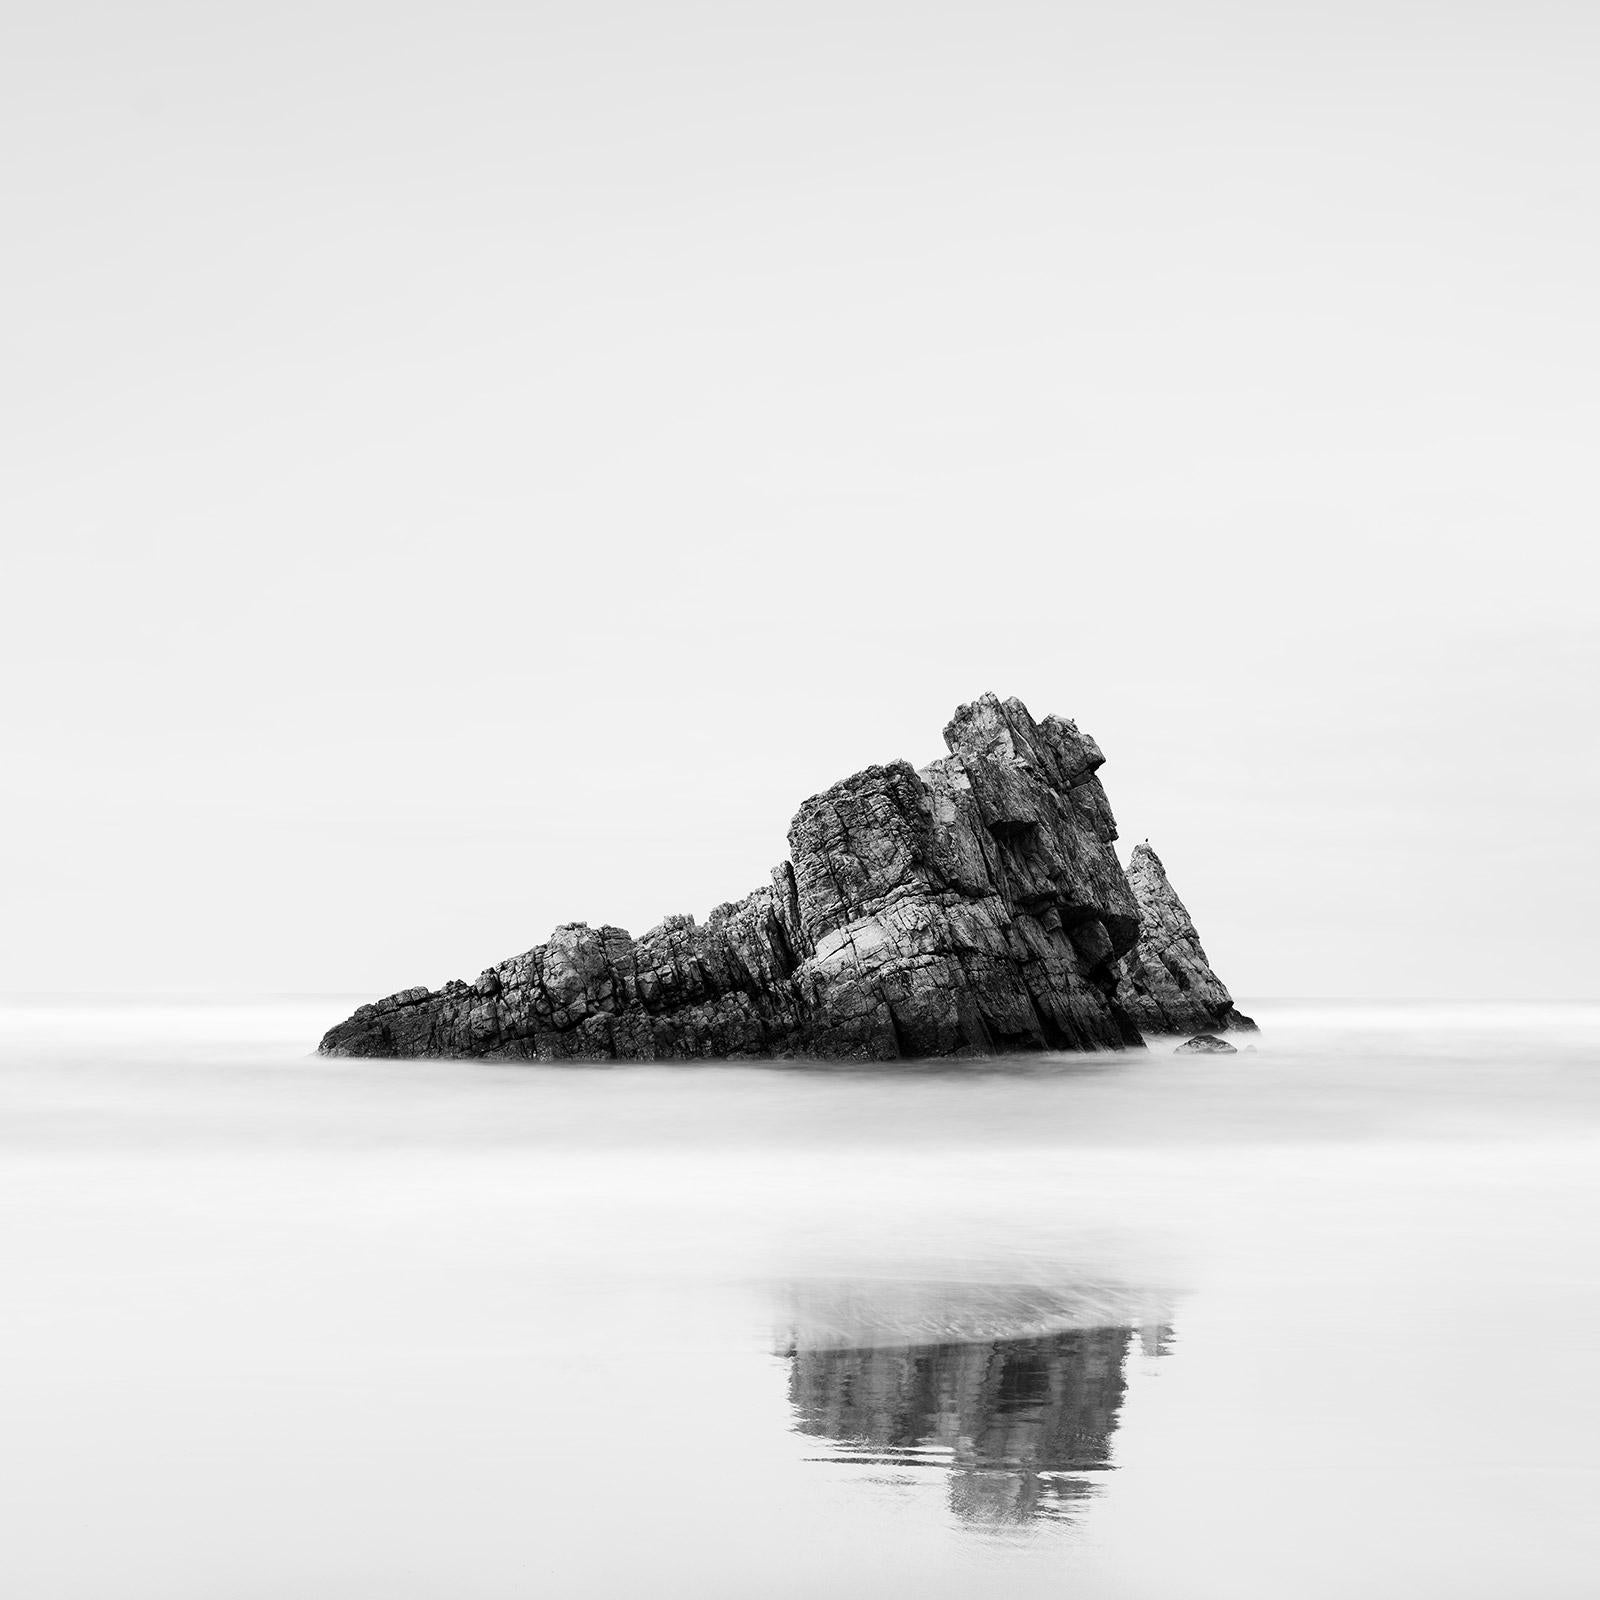 Gerald Berghammer Black and White Photograph - Rock on the Beach, Bay of Biscay, Spain, black and white landscape photography